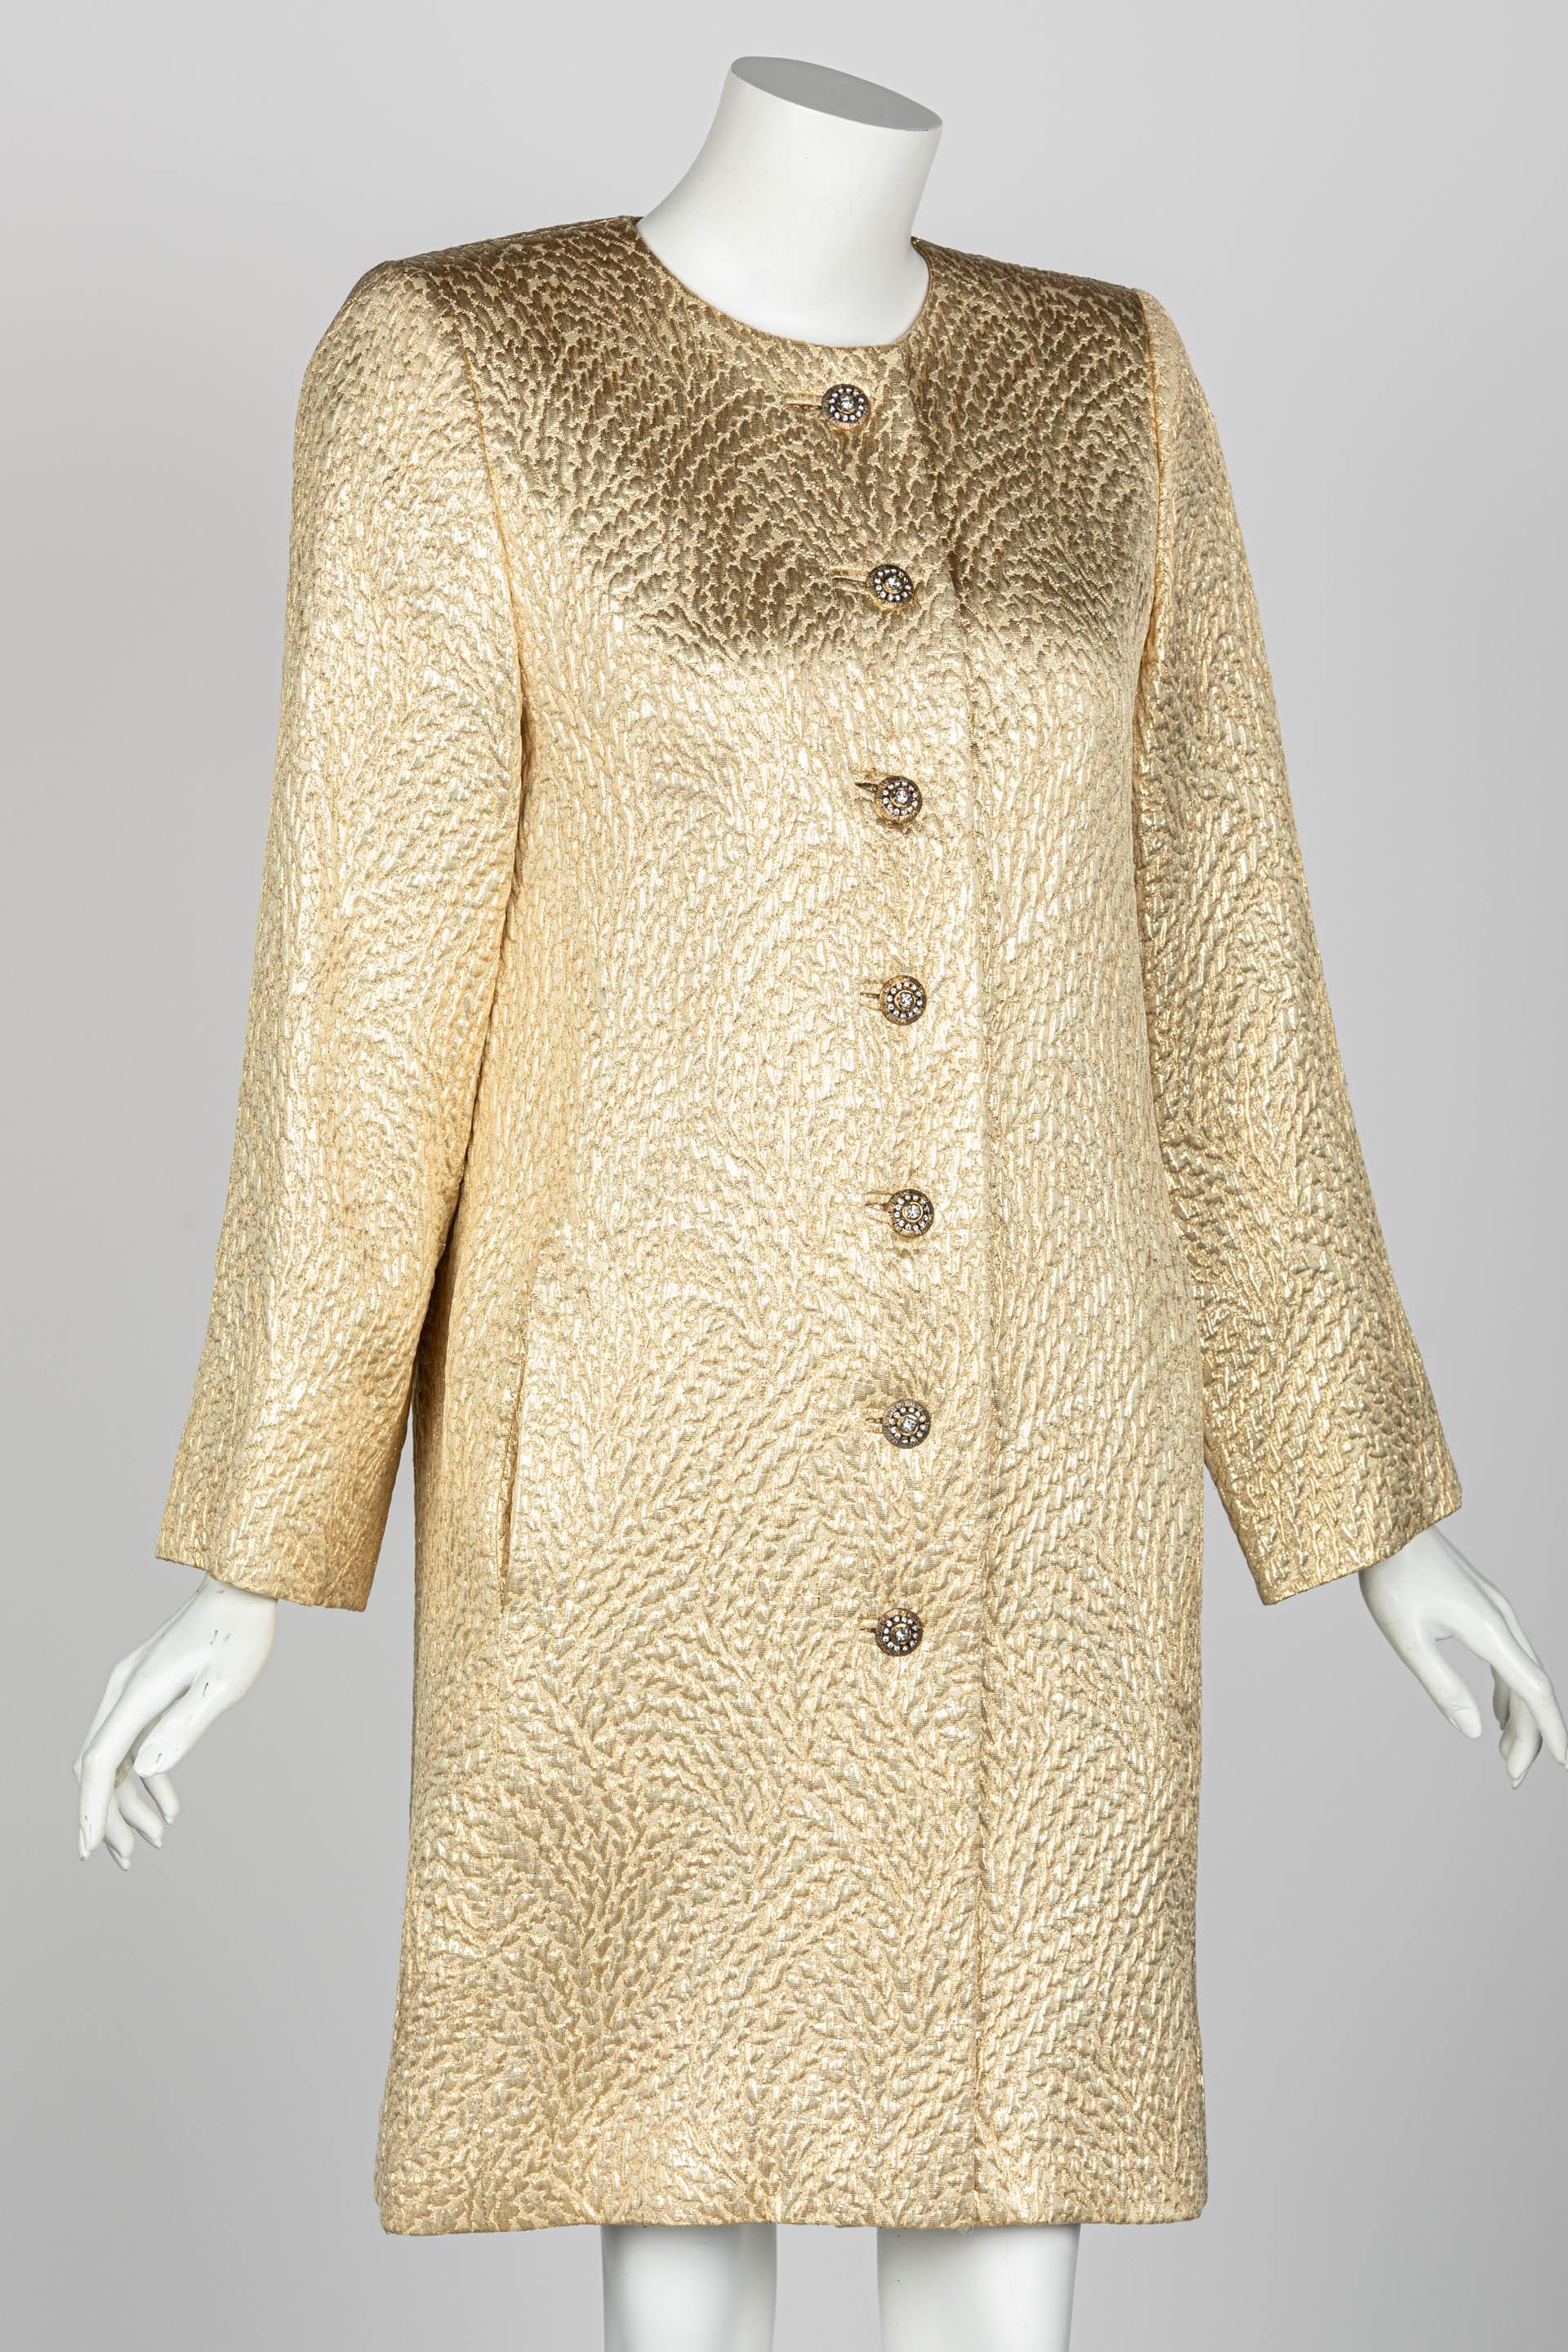 Yves Saint Laurent Gold Evening Coat w/ Jeweled Buttons YSL, 1990s In Excellent Condition For Sale In Boca Raton, FL